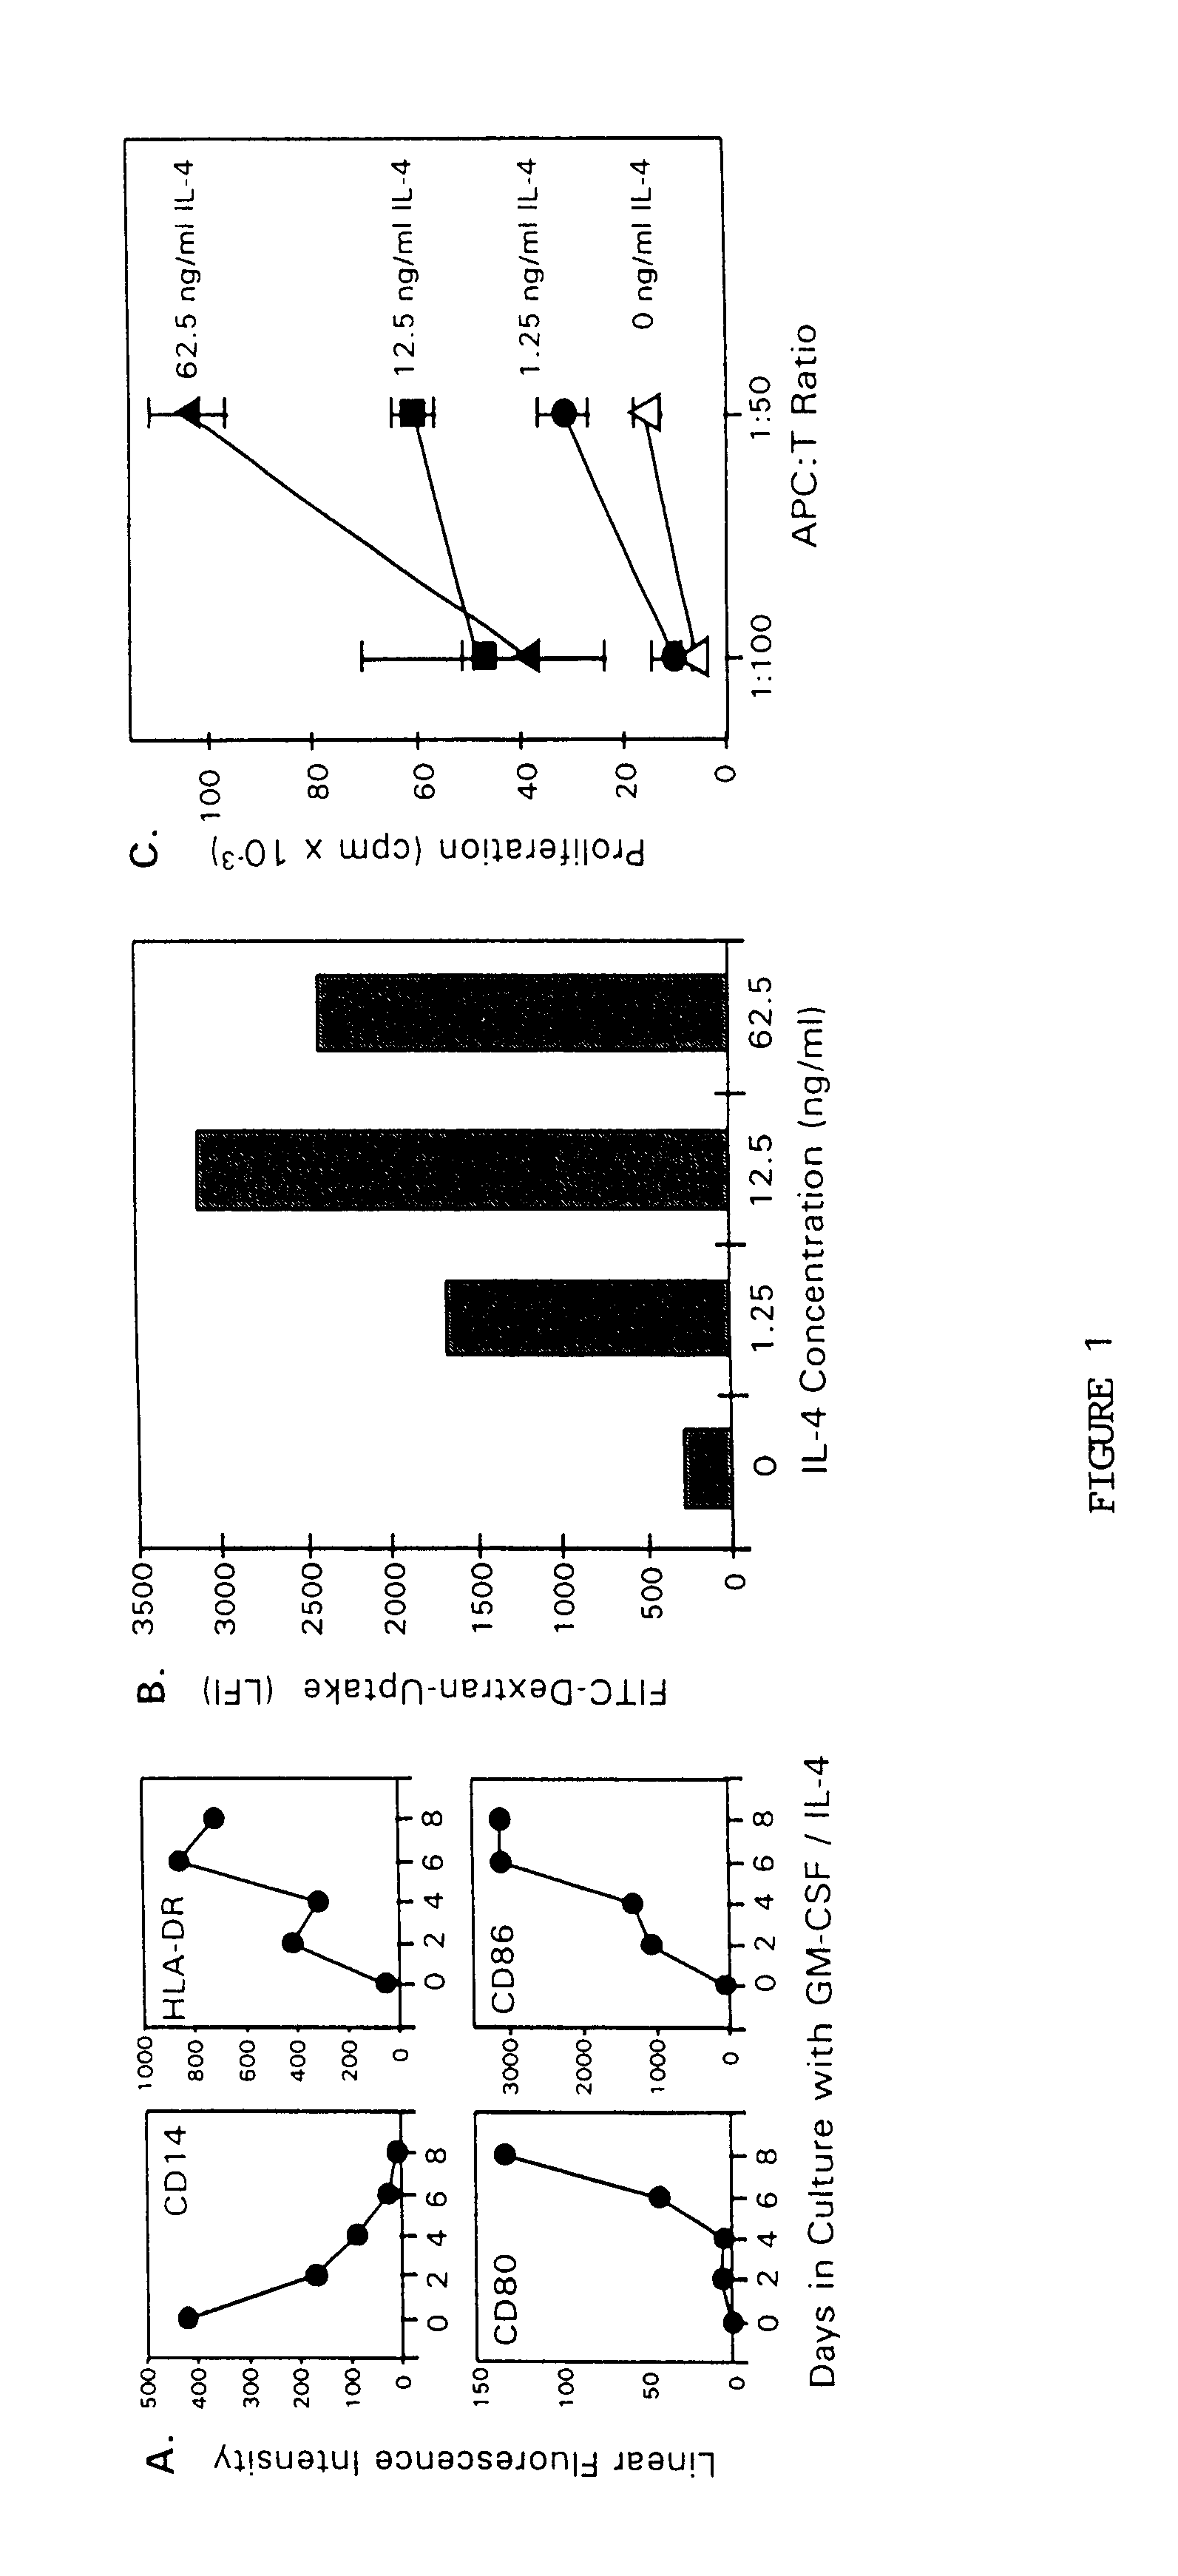 Methods for enhancing antigen-presenting cells and anti-tumor responses in a human patient